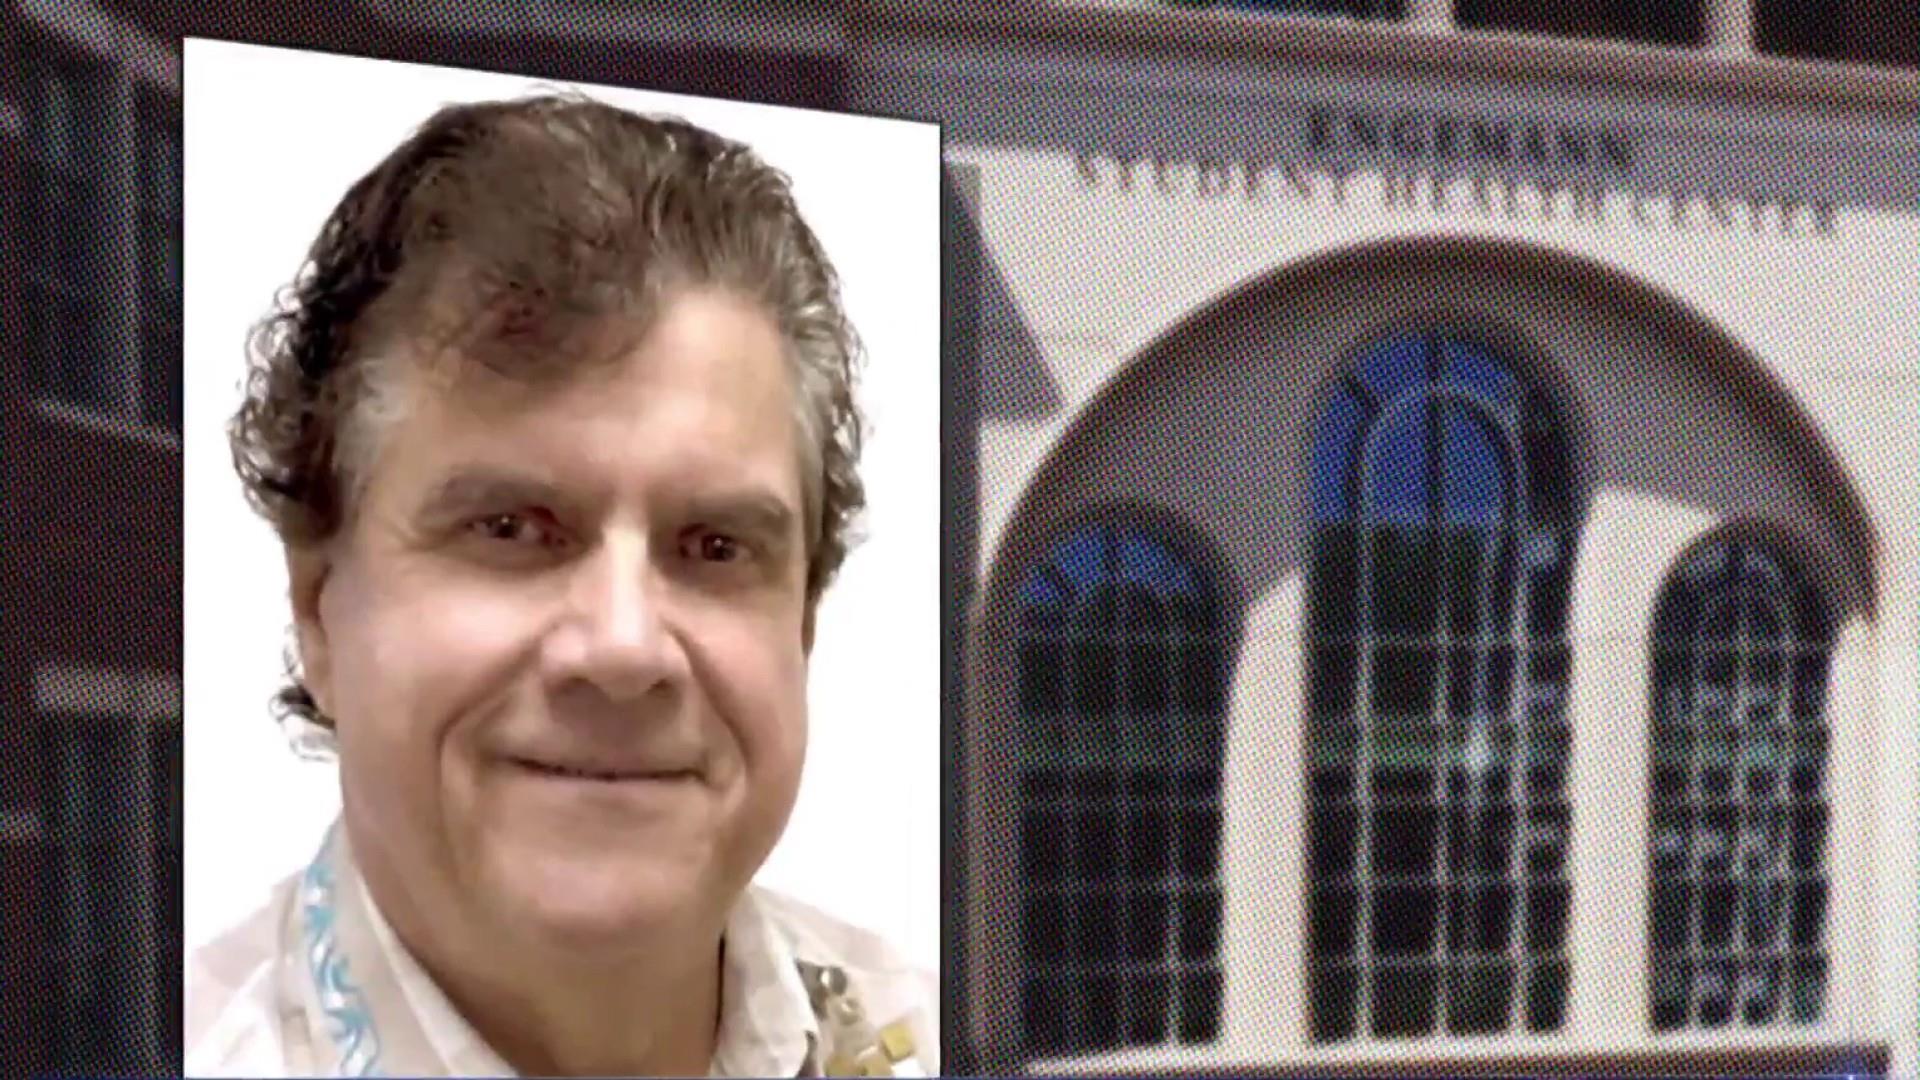 Student speaks out about alleged sexual abuse from USC gynecologist